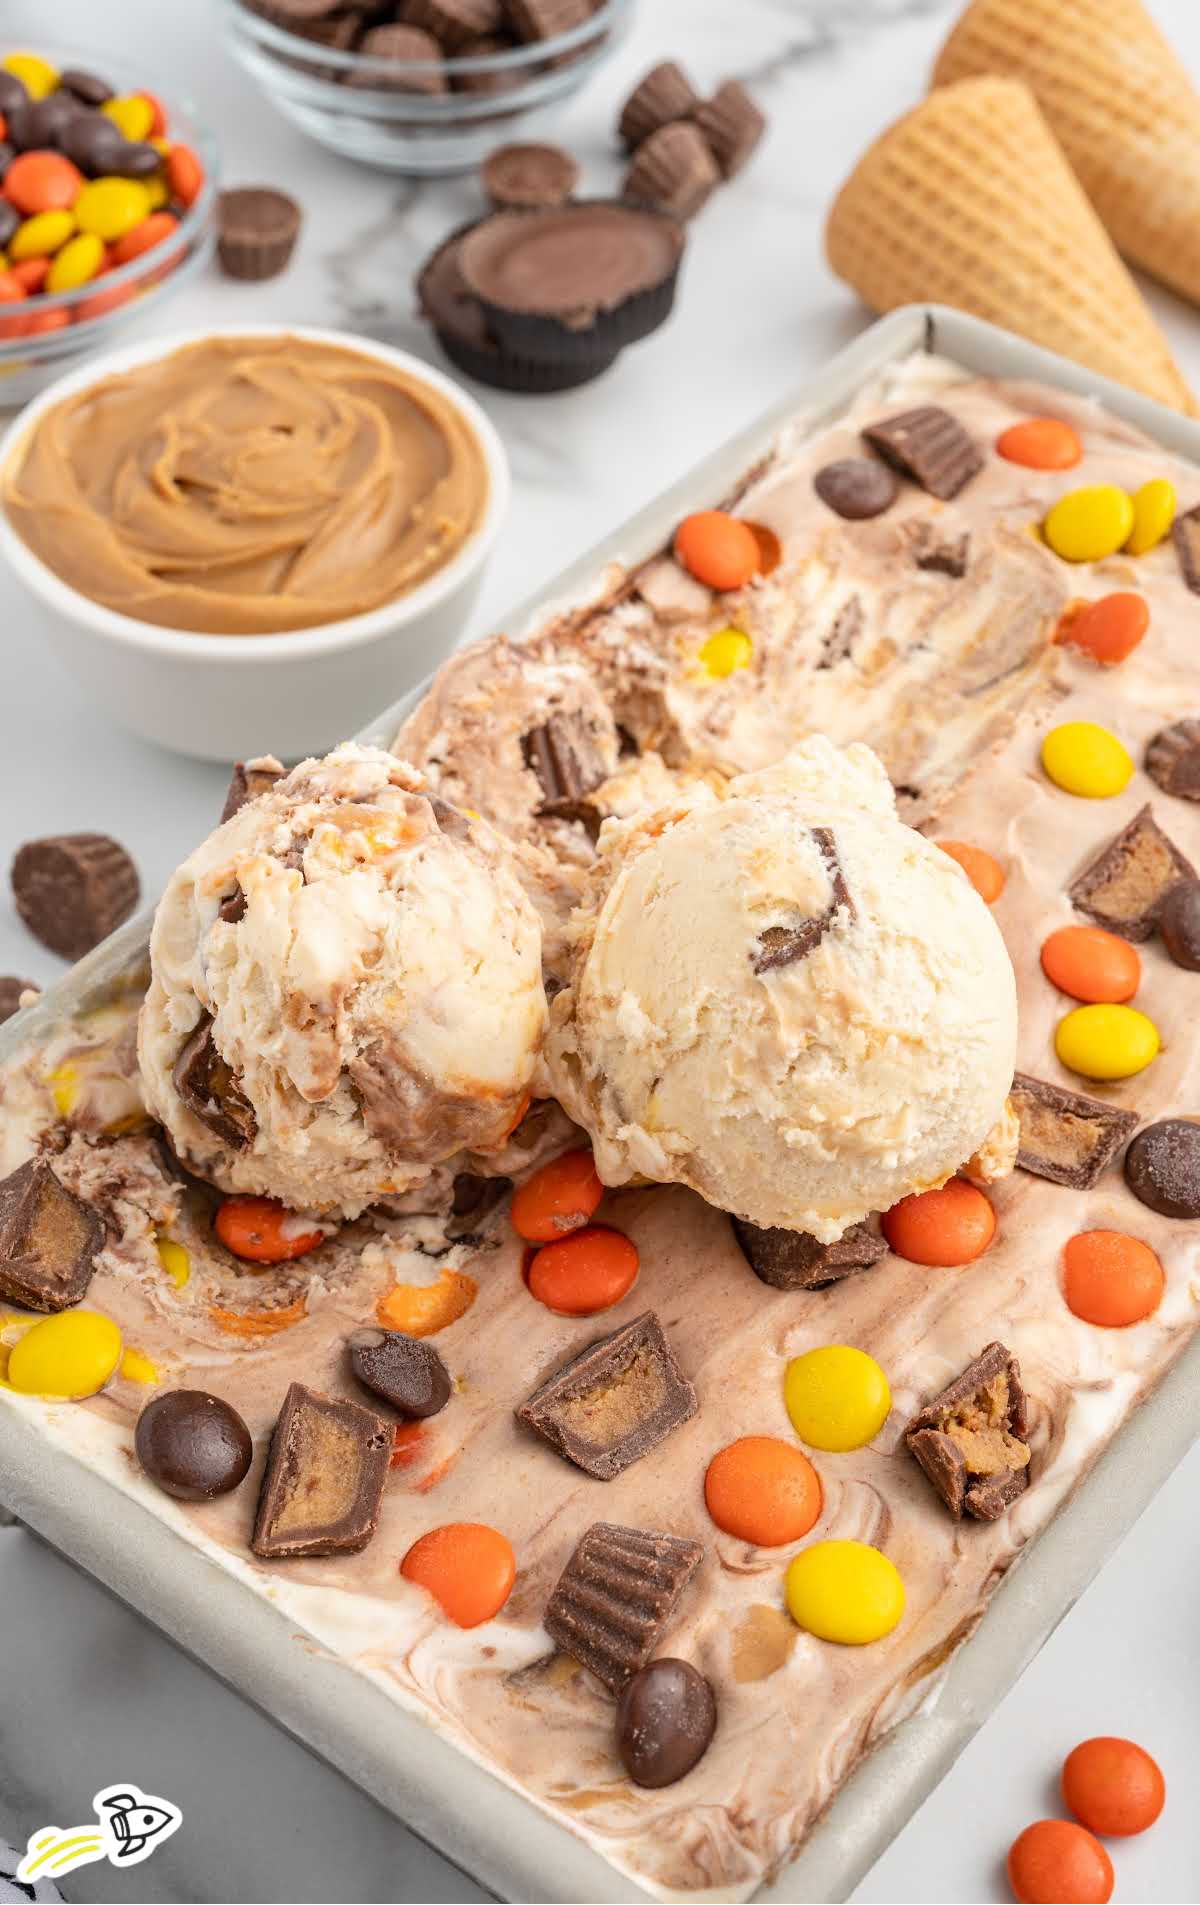 scoops of Peanut Butter Cup Ice Cream on top of the ice cream in a pan